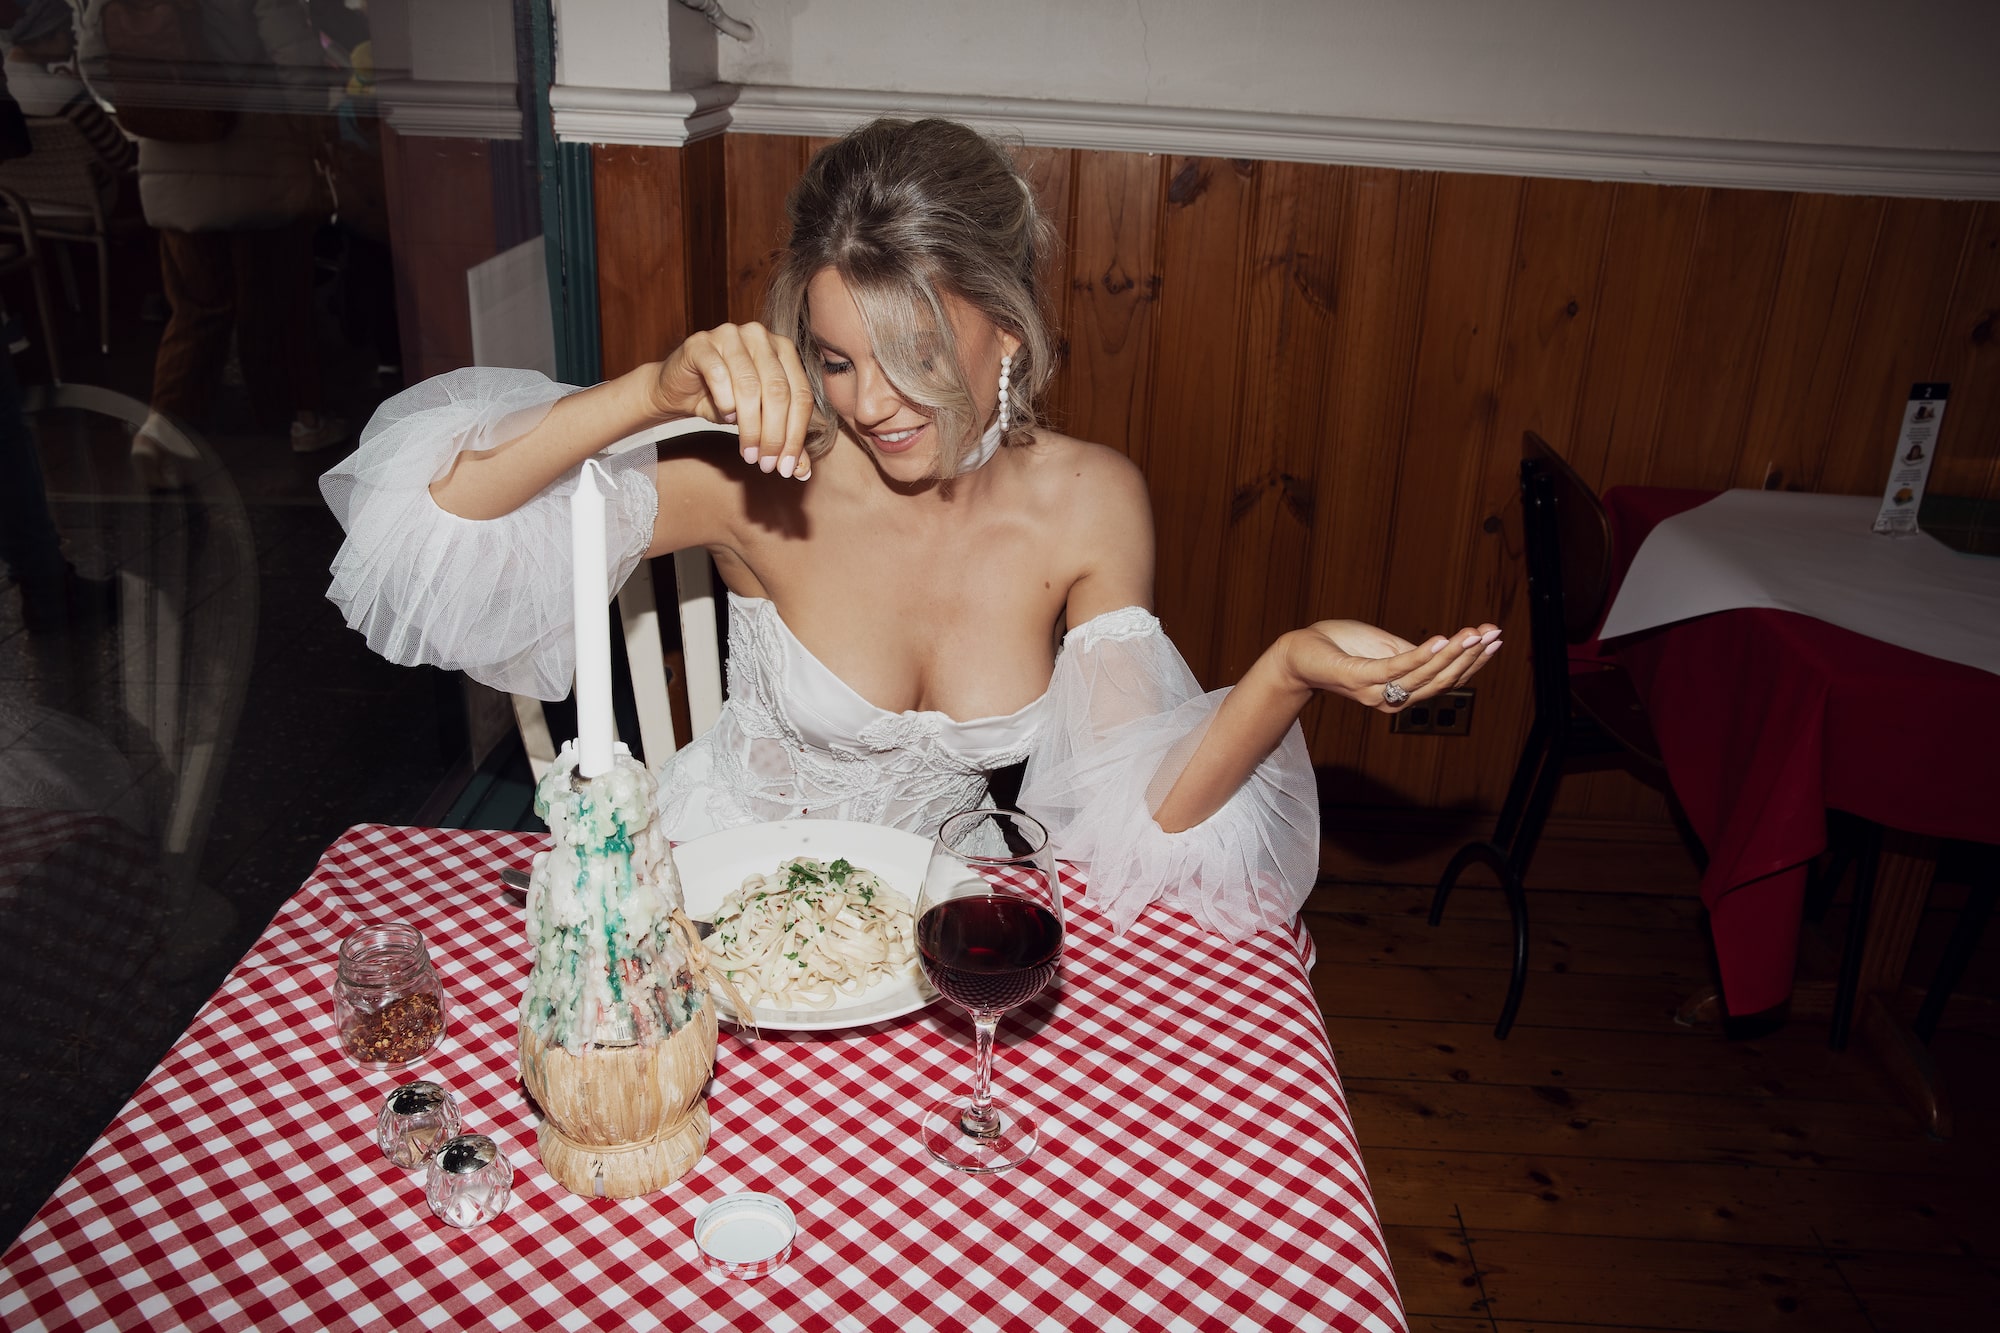 Model posing sprinkling salt onto pasta seated at a table in an italian cafe wearing the Giulietta gown.